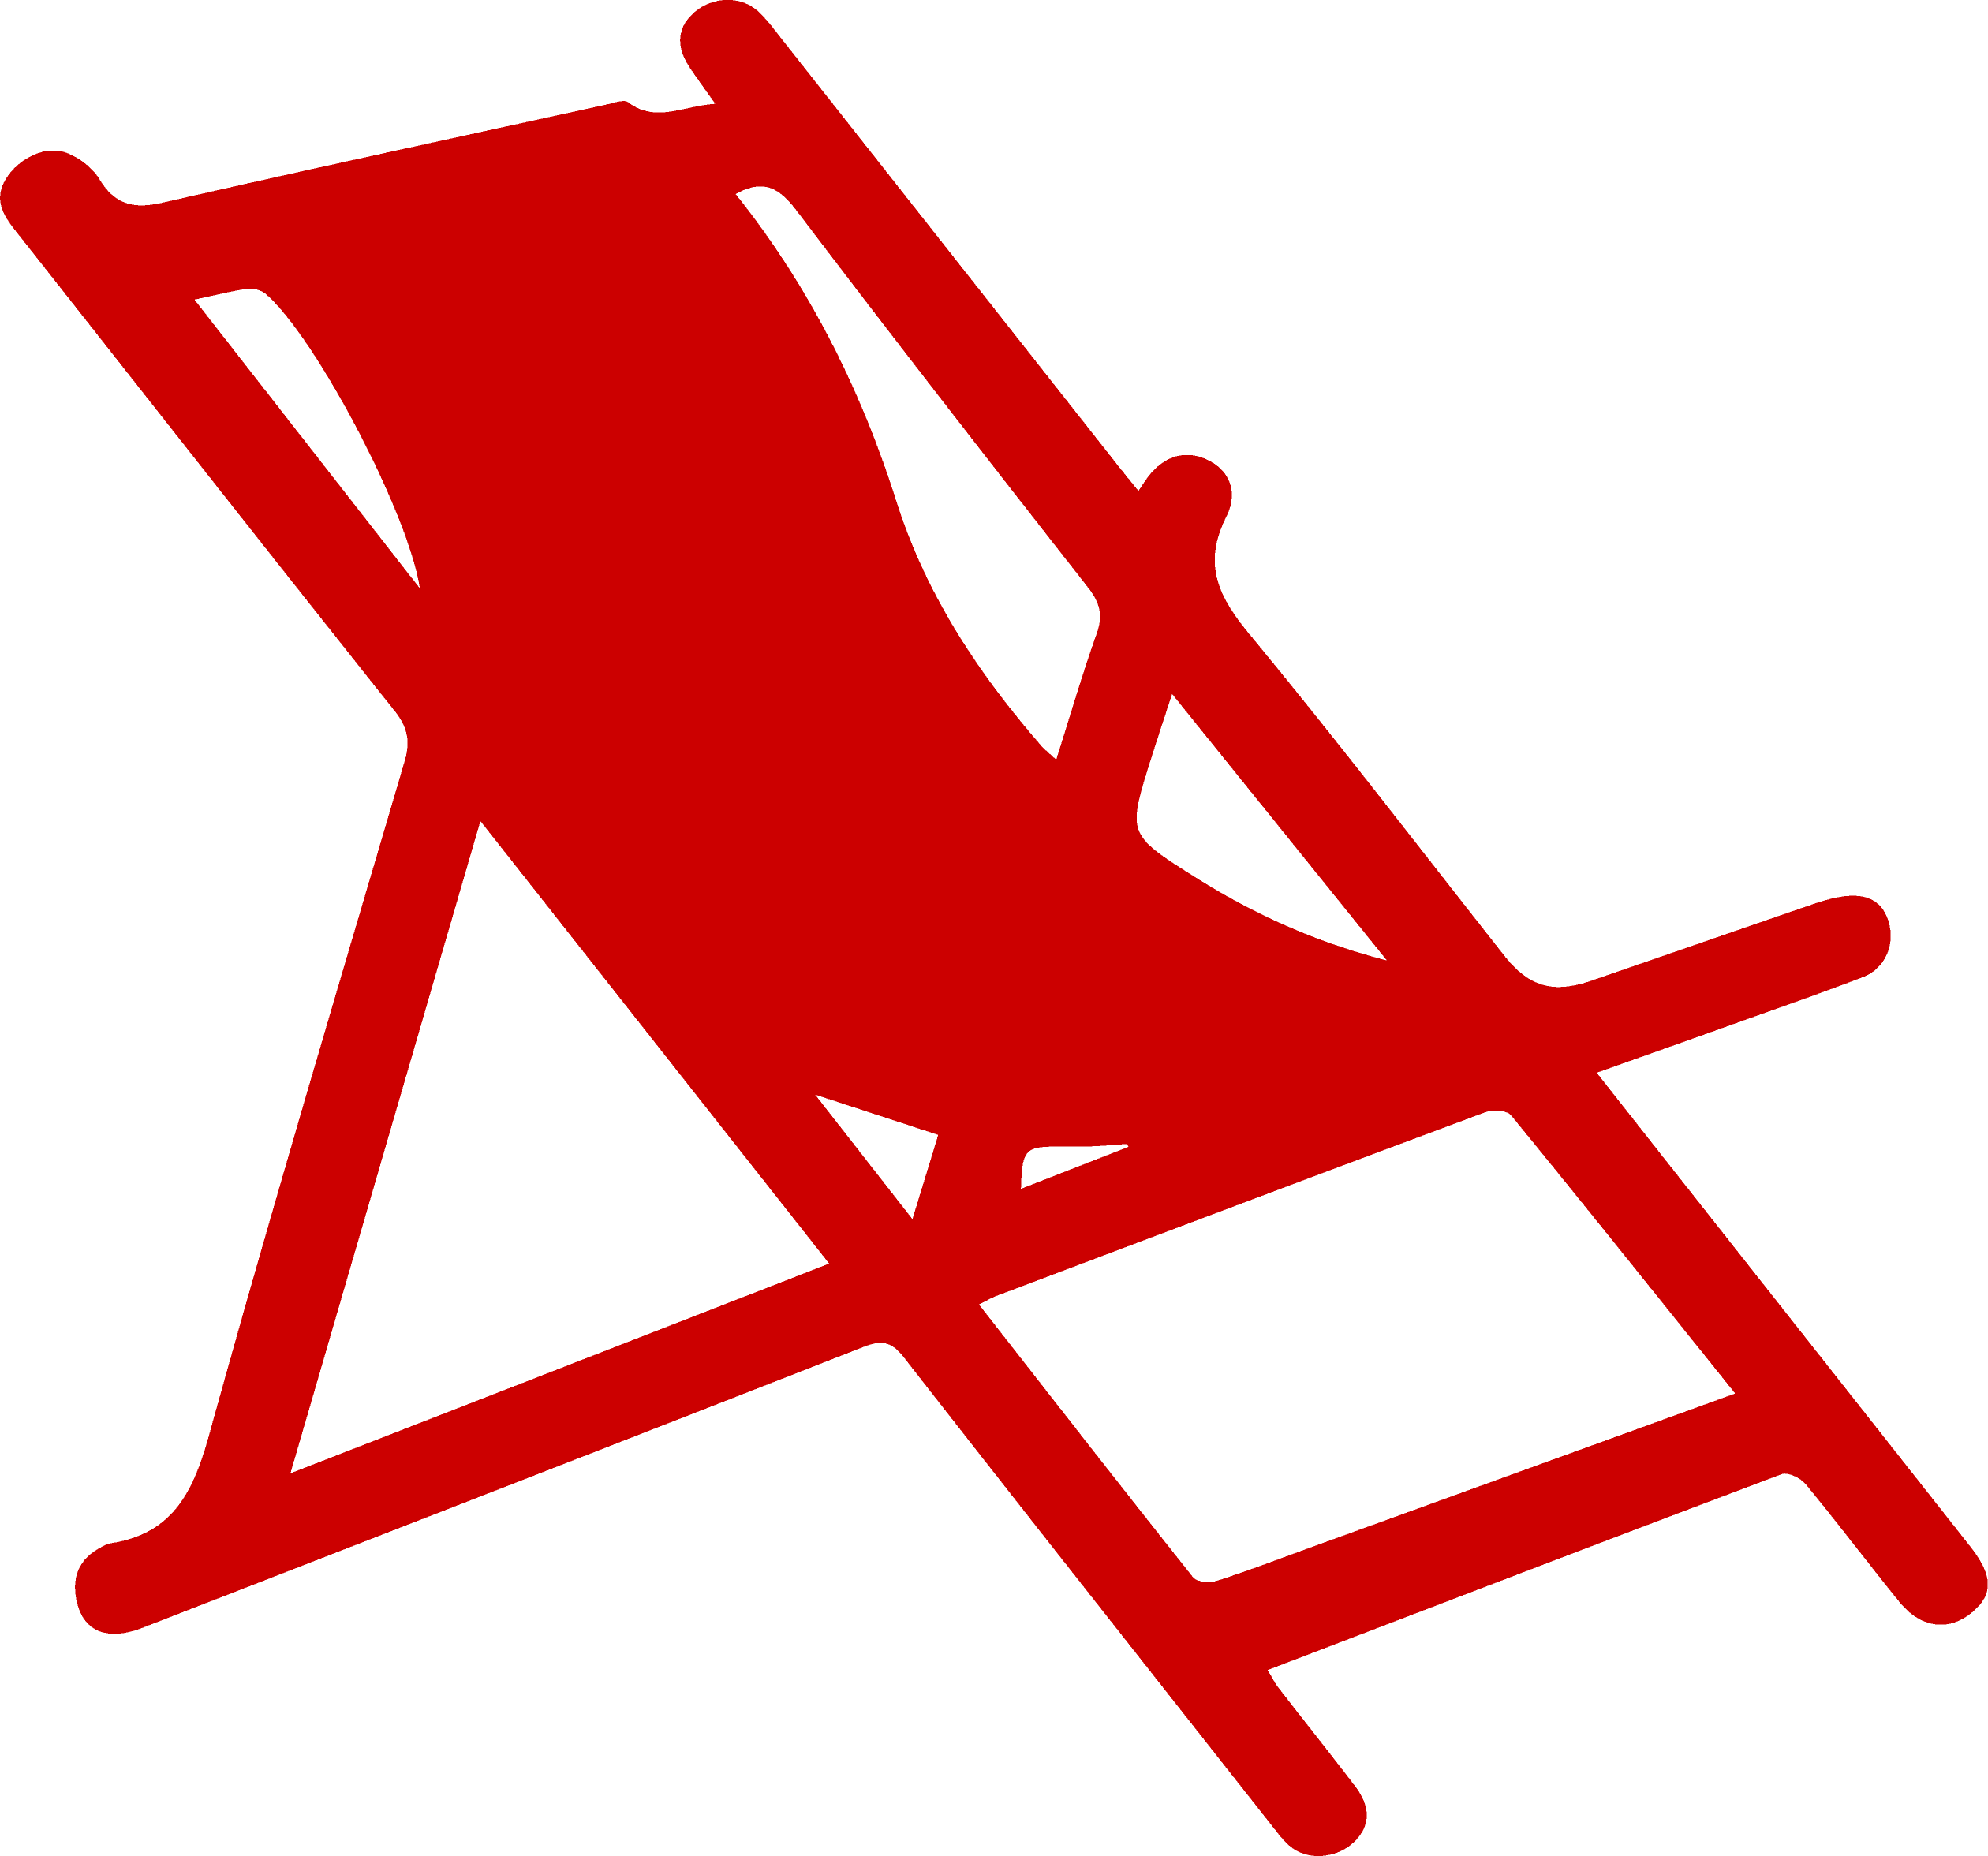 Bring A Lawn Chair To Watch The Fireworks - Lawn Chair Icon Png (2520x2353)